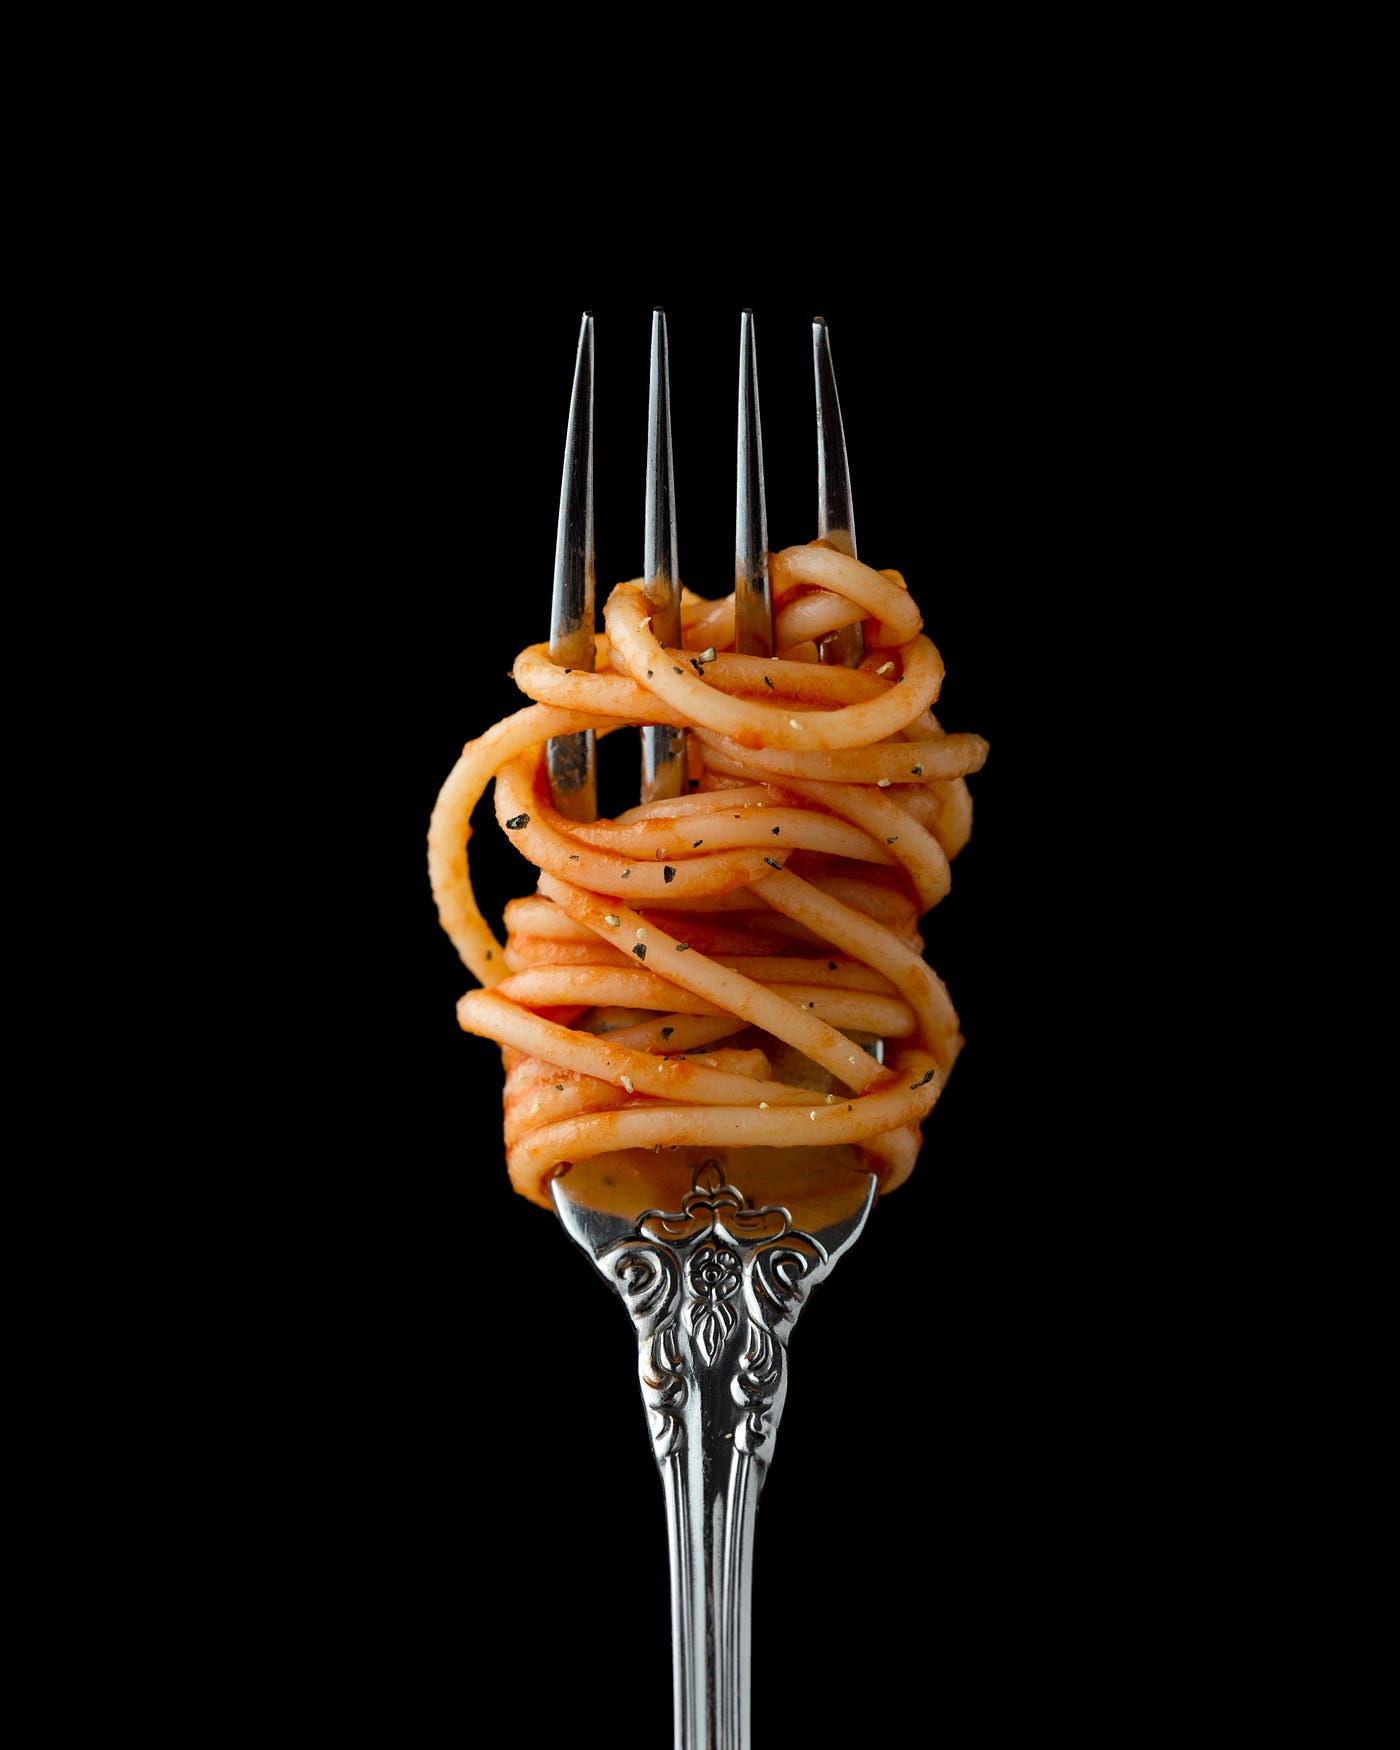 We see the end of a fork, pointing up from below, with spaghetti twirling around it. Black background.